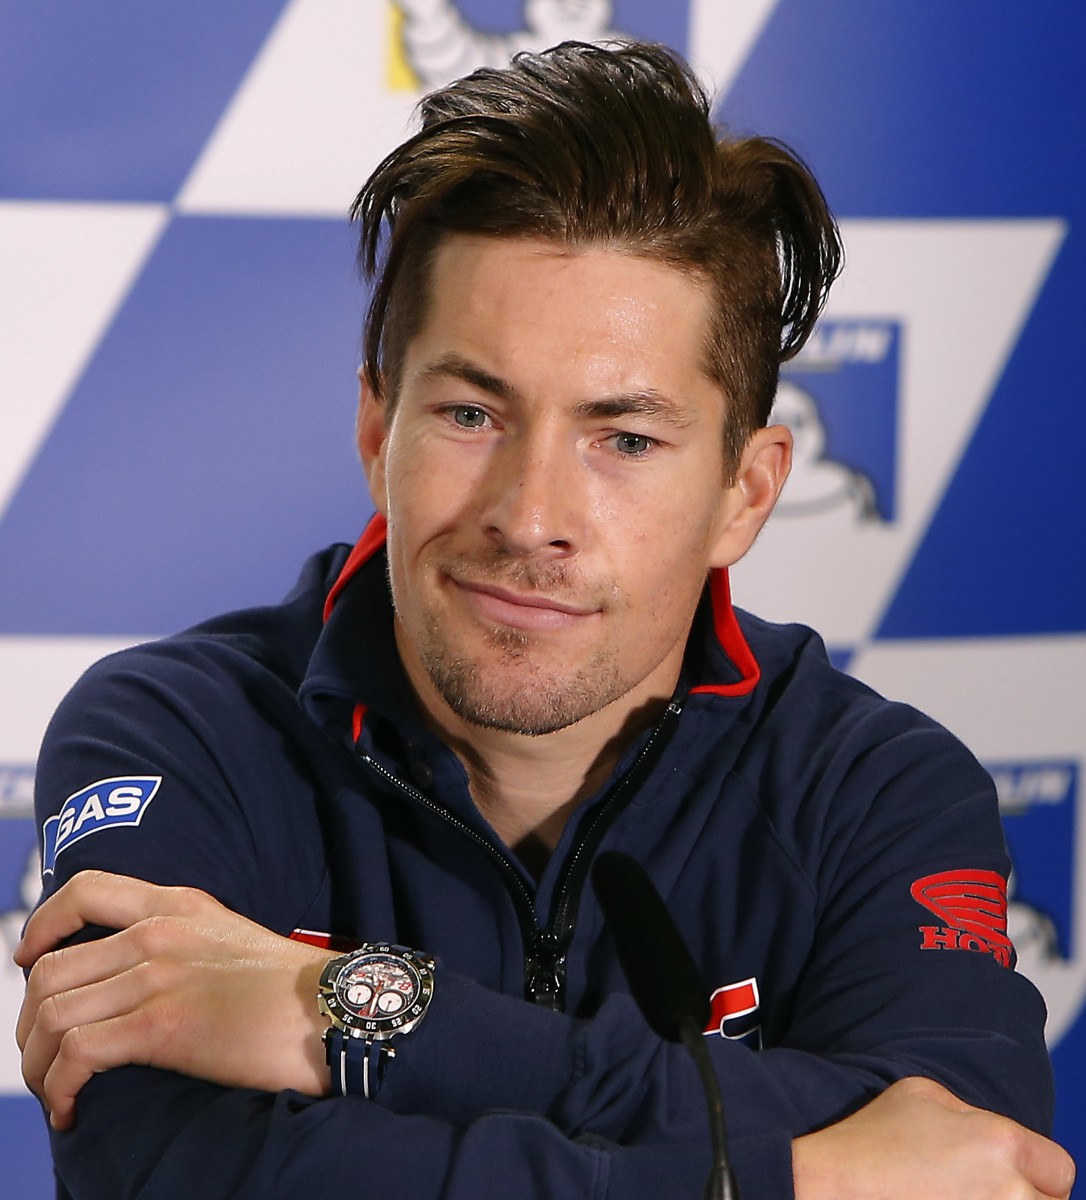 You are currently viewing Nicky Hayden